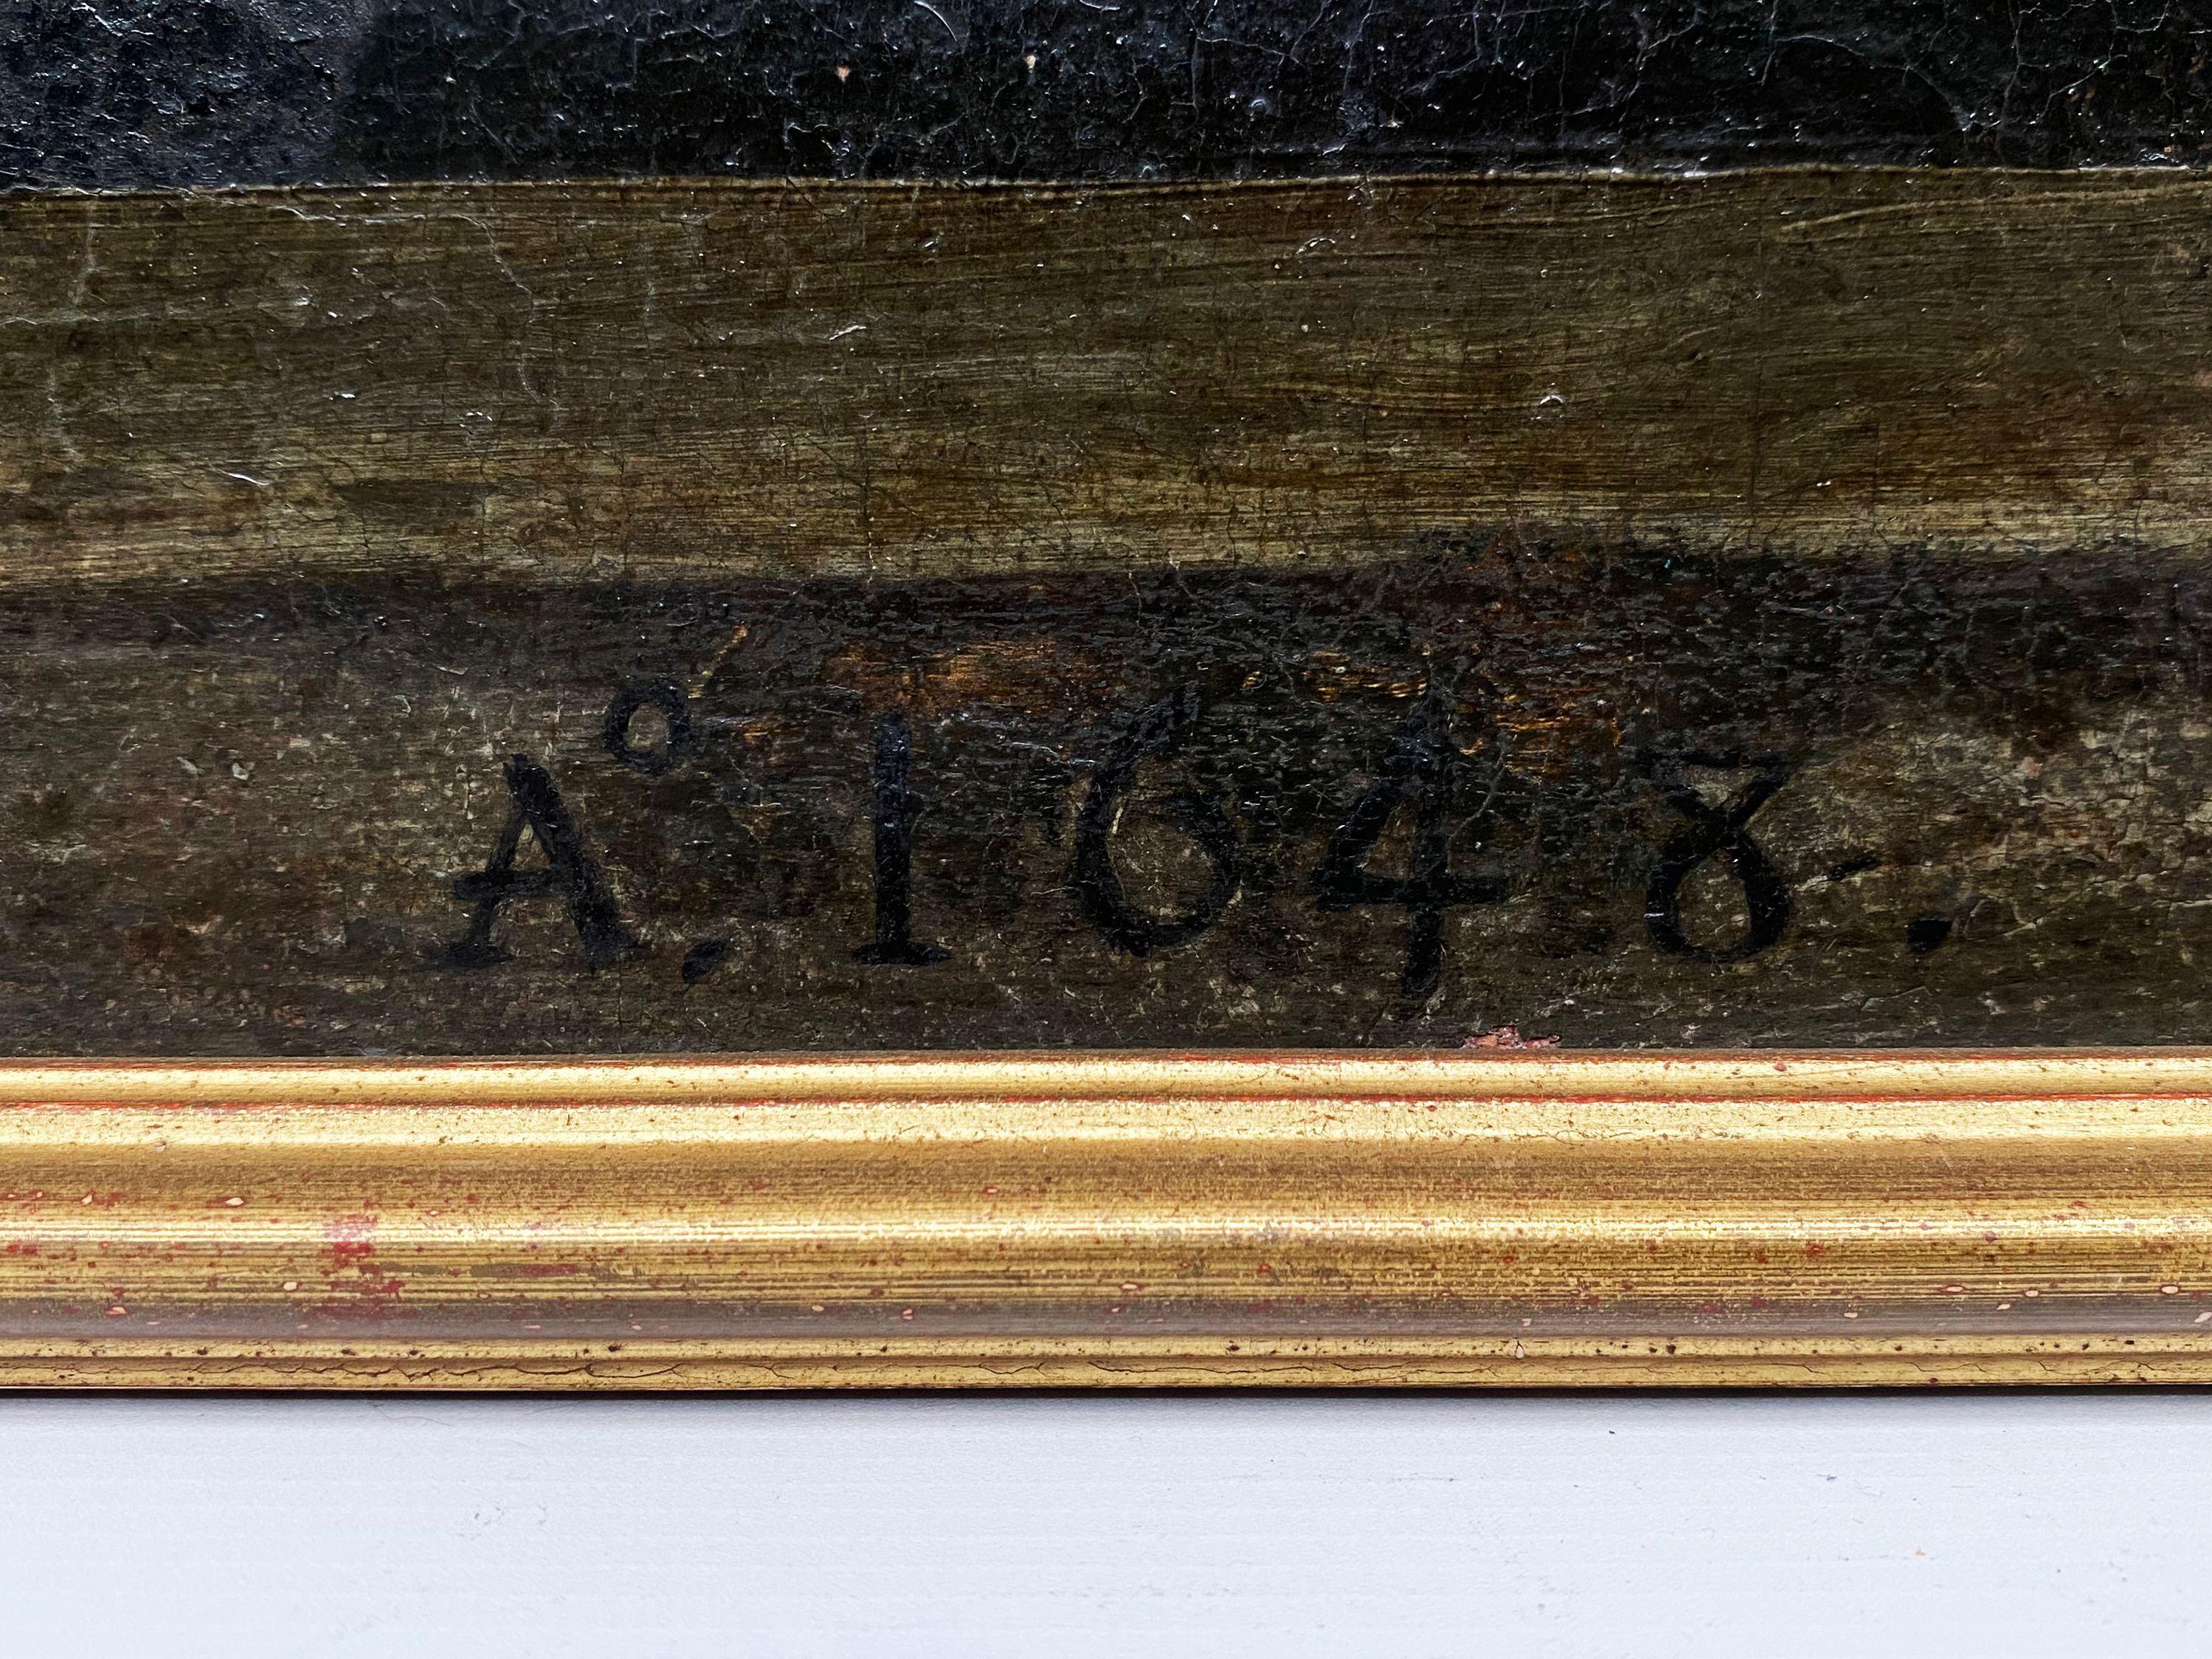 Example of an inscription visible on an old painting